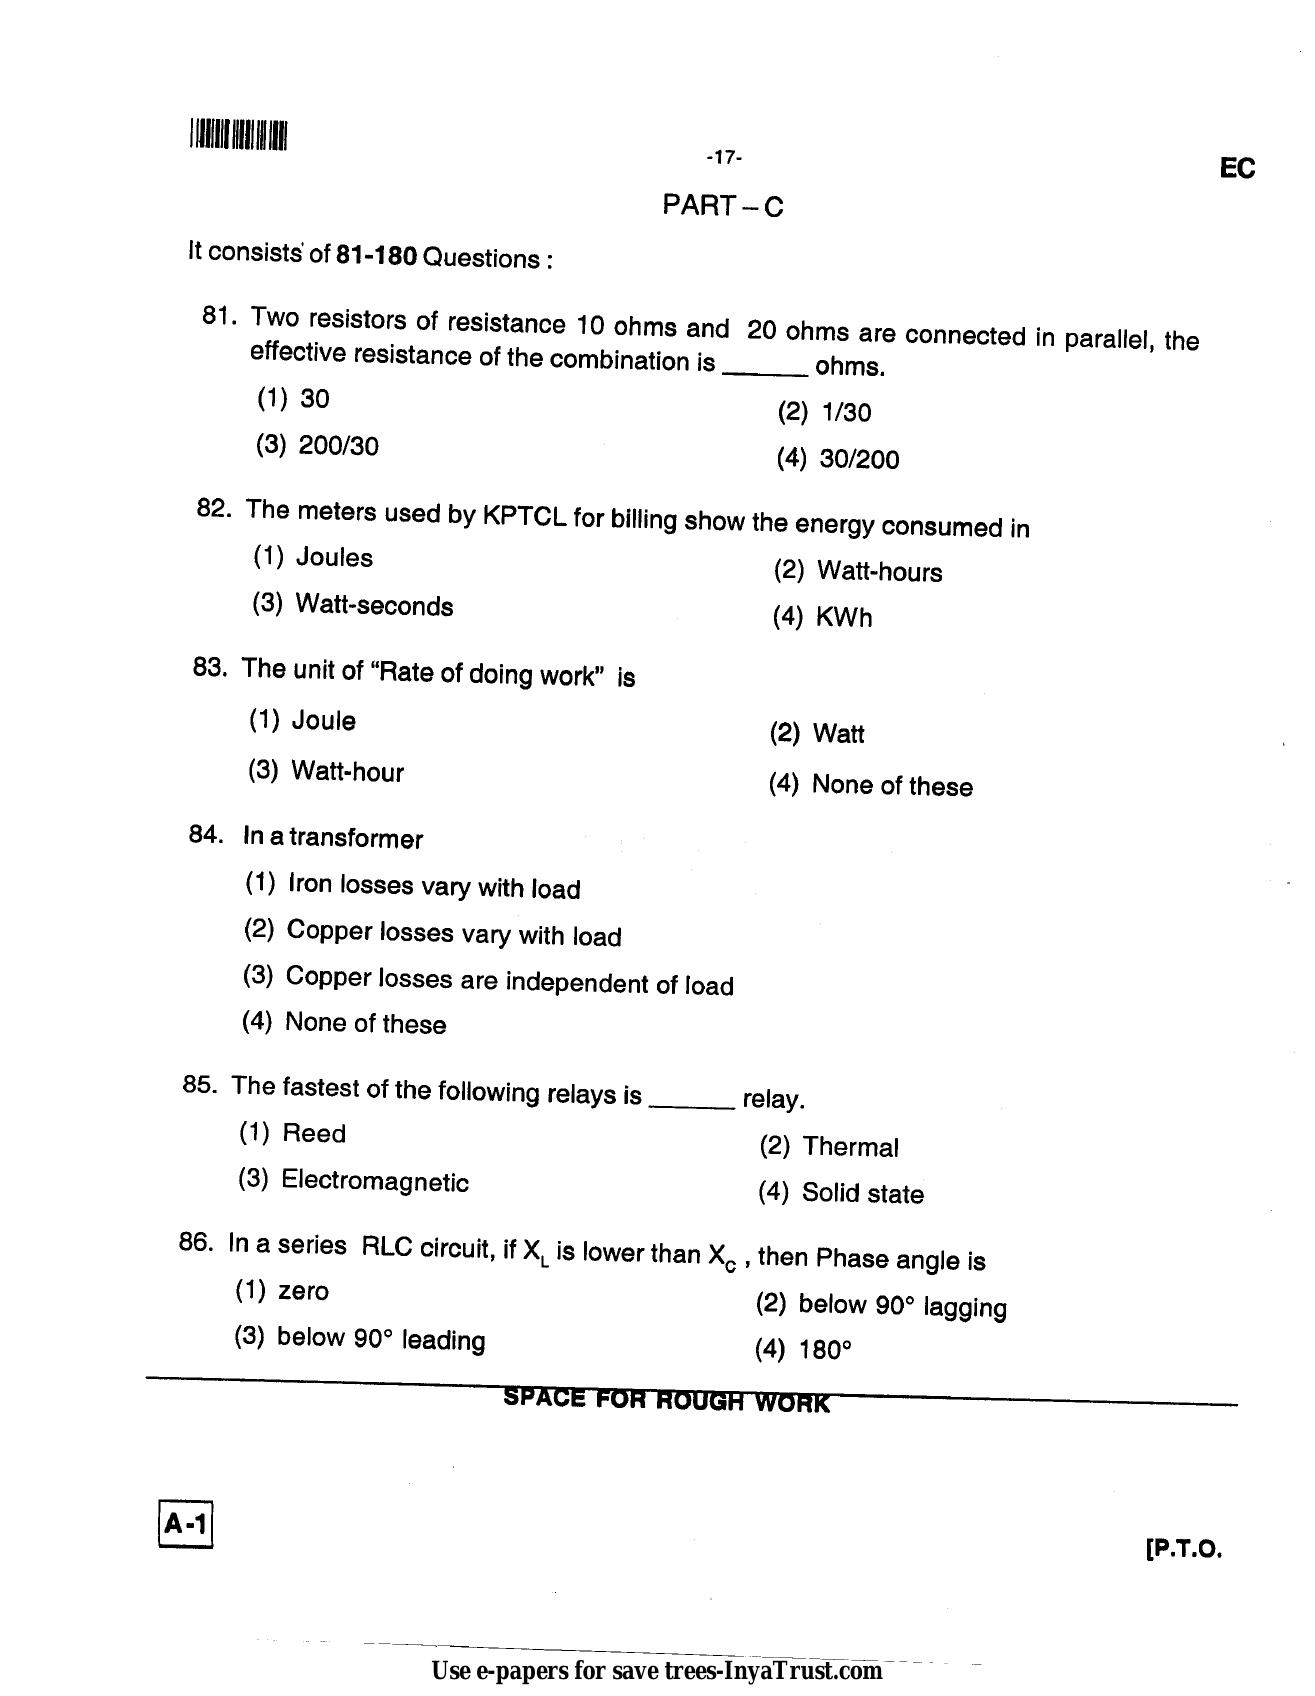 Karnataka Diploma CET- 2013 Electronics and Communication Engineering Question Paper - Page 17